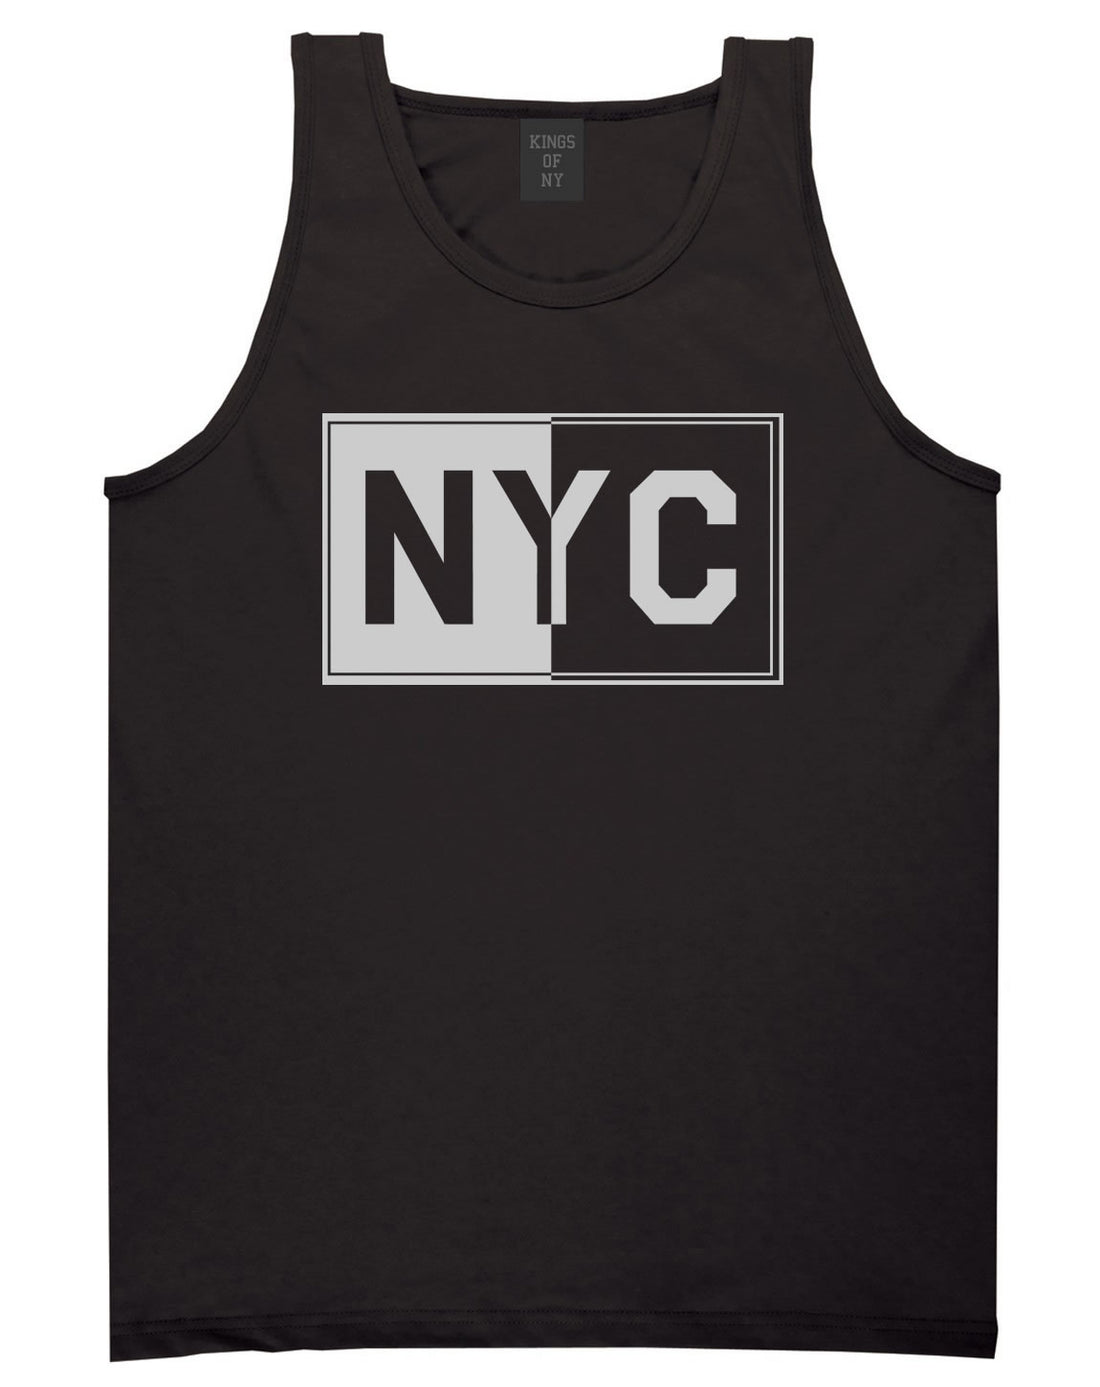 NYC Rectangle New York City Tank Top in Black By Kings Of NY